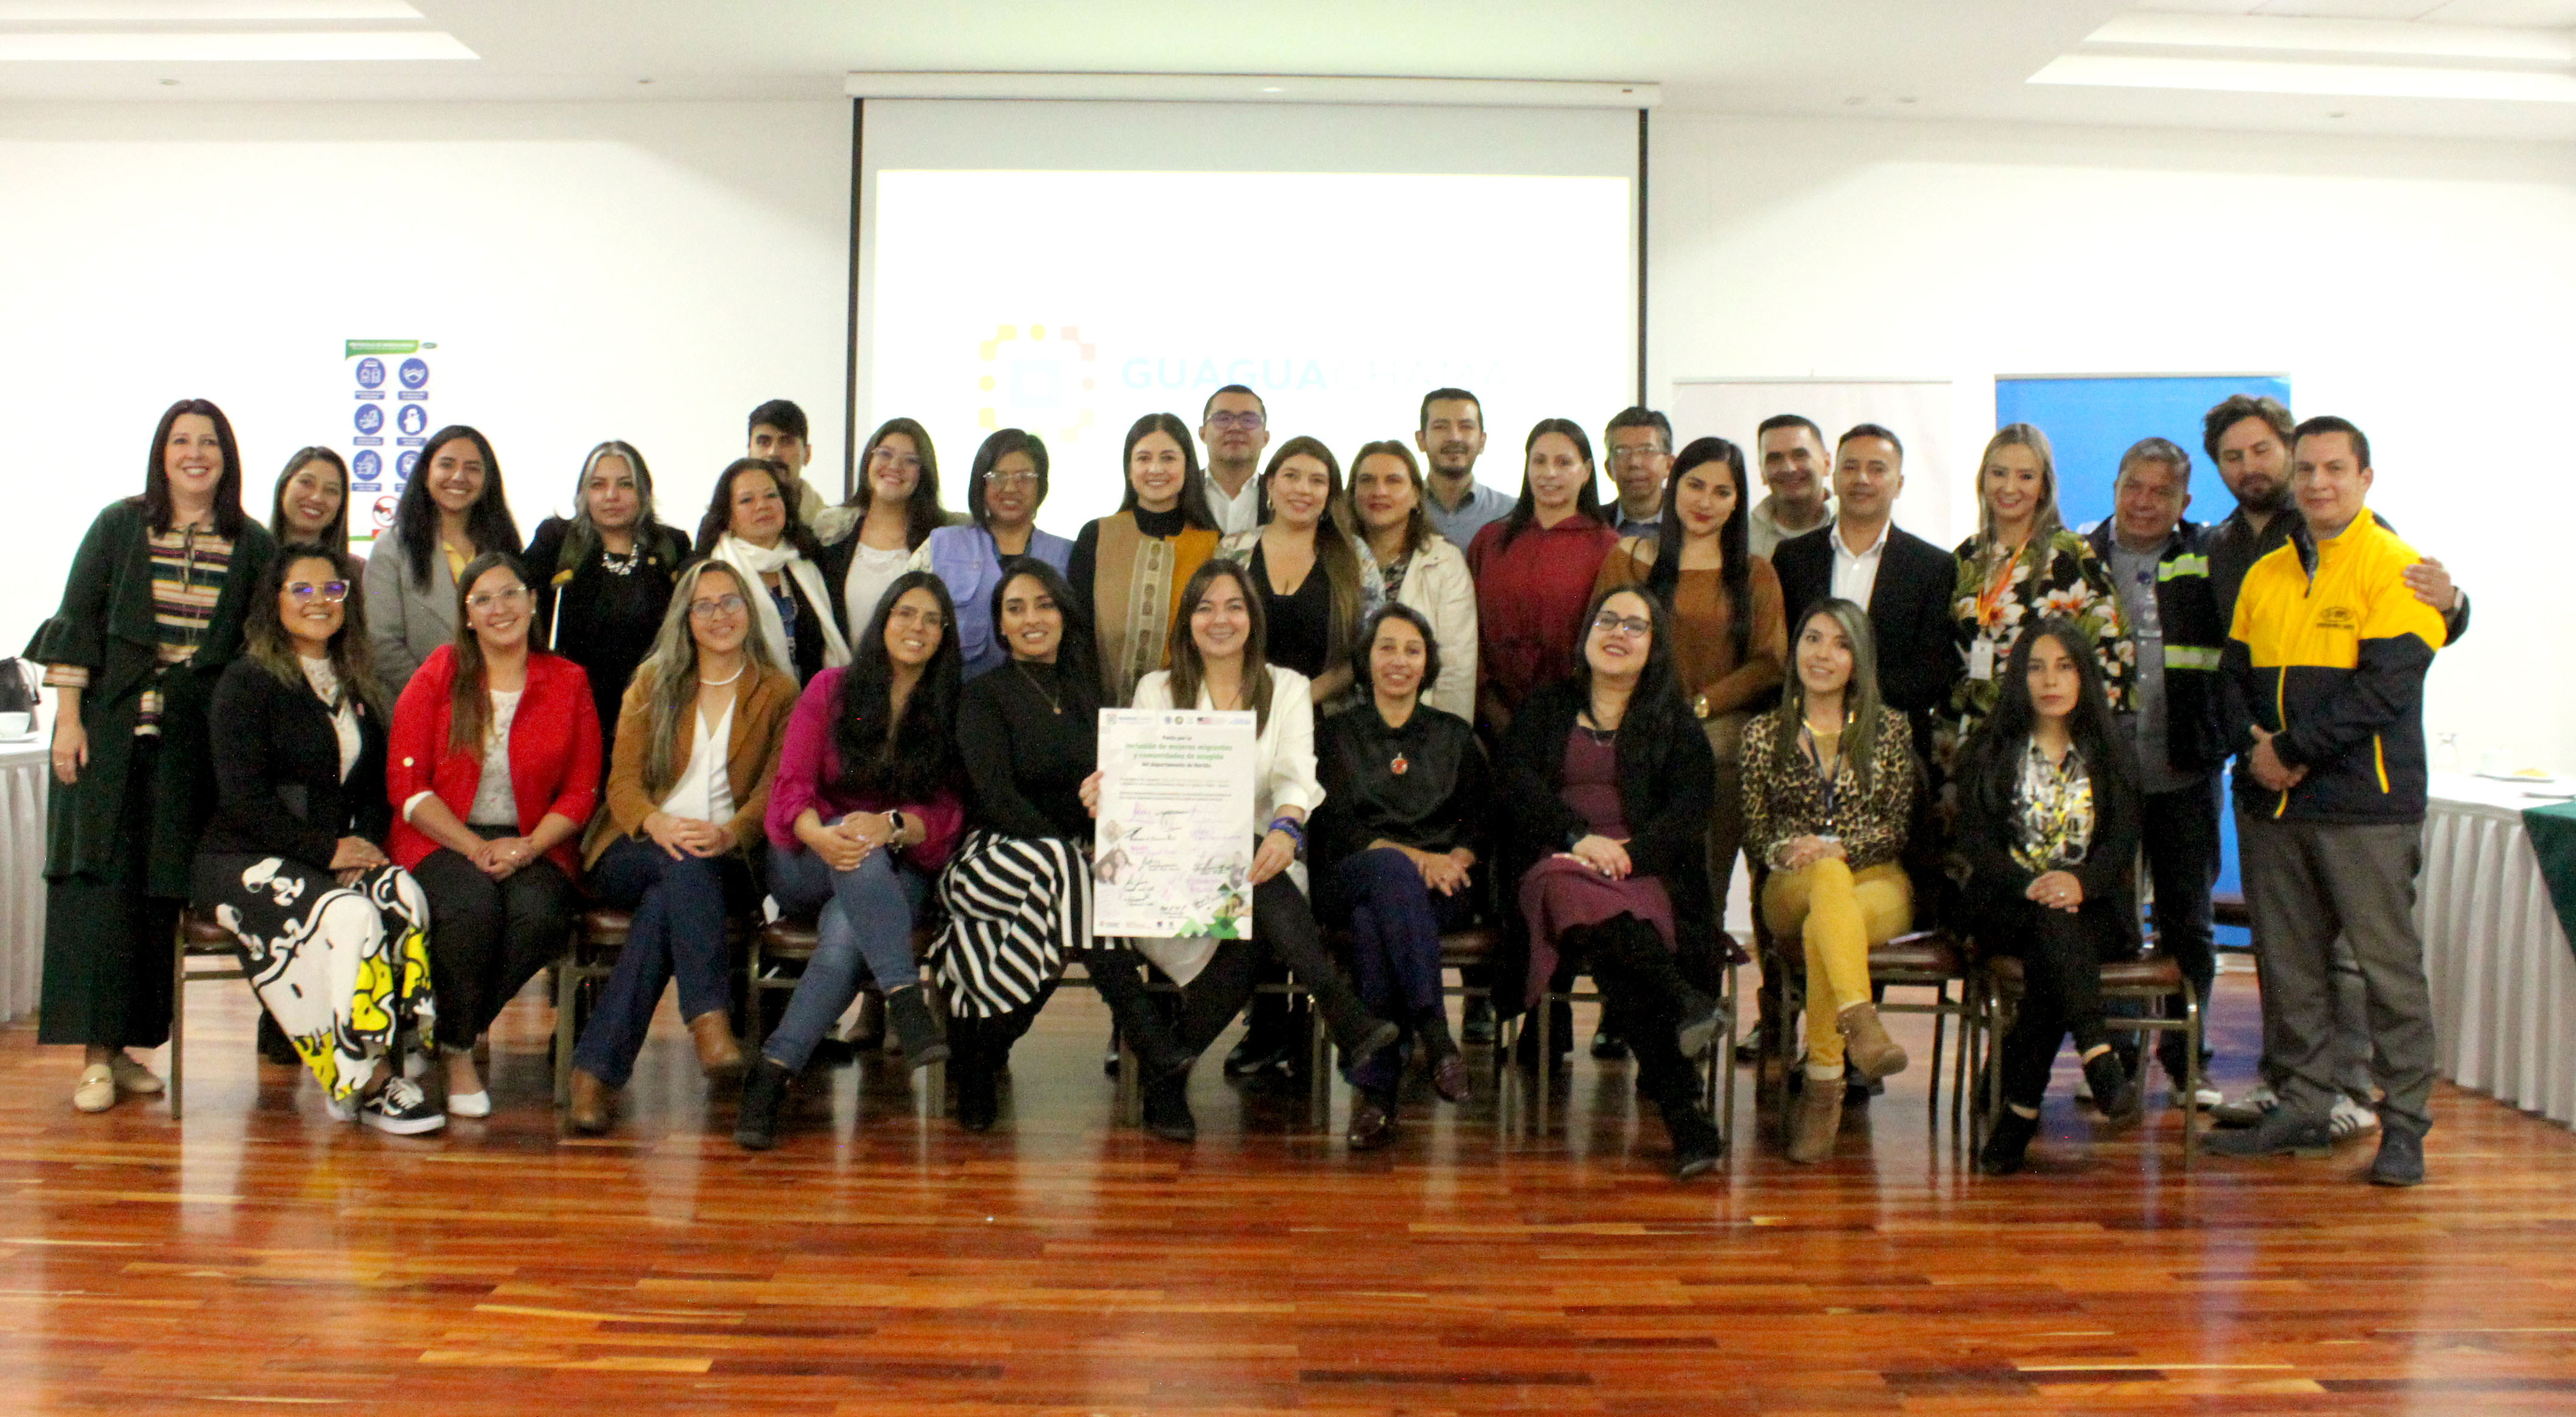 Foto: ONU Mujeres Colombia